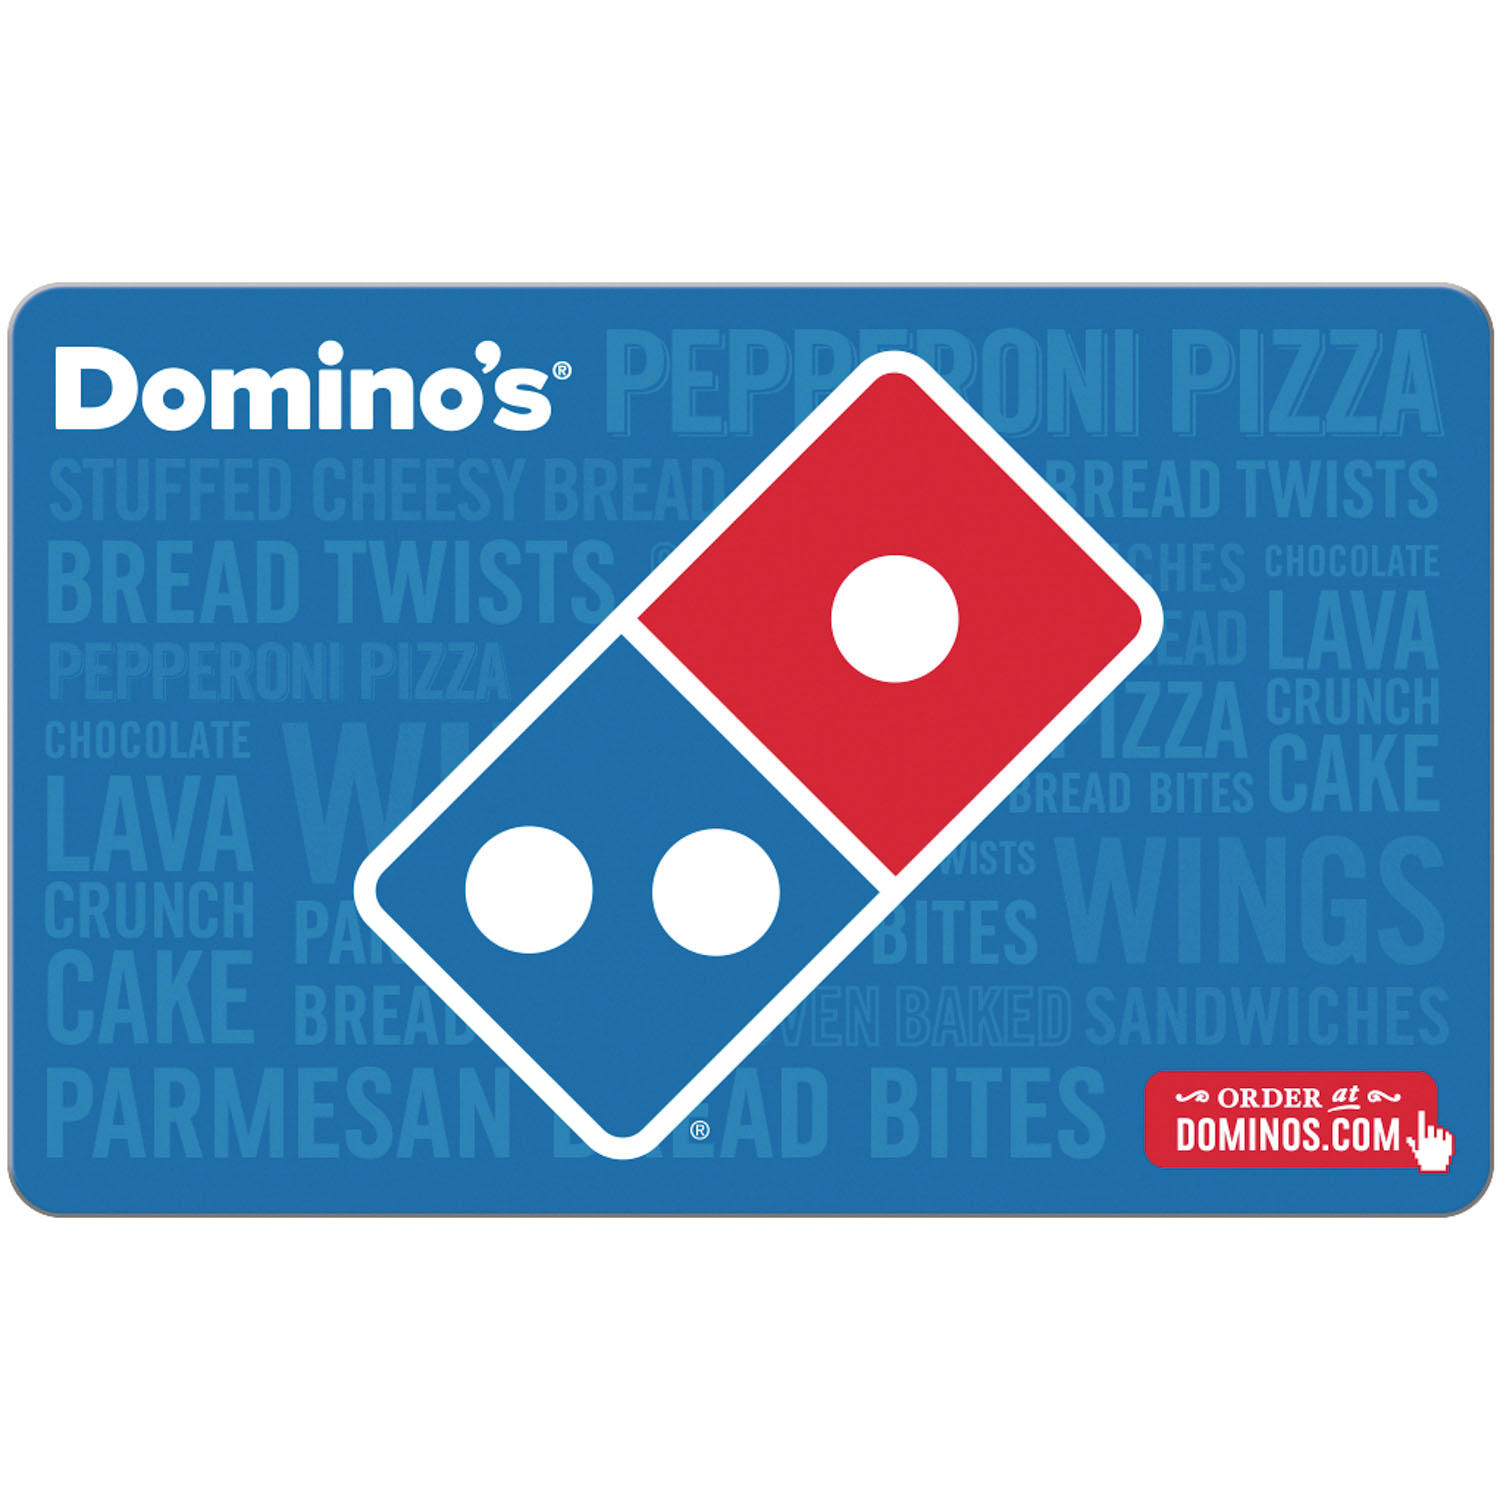 Domino's $100 Value Gift Cards (4 X $25) $75.00